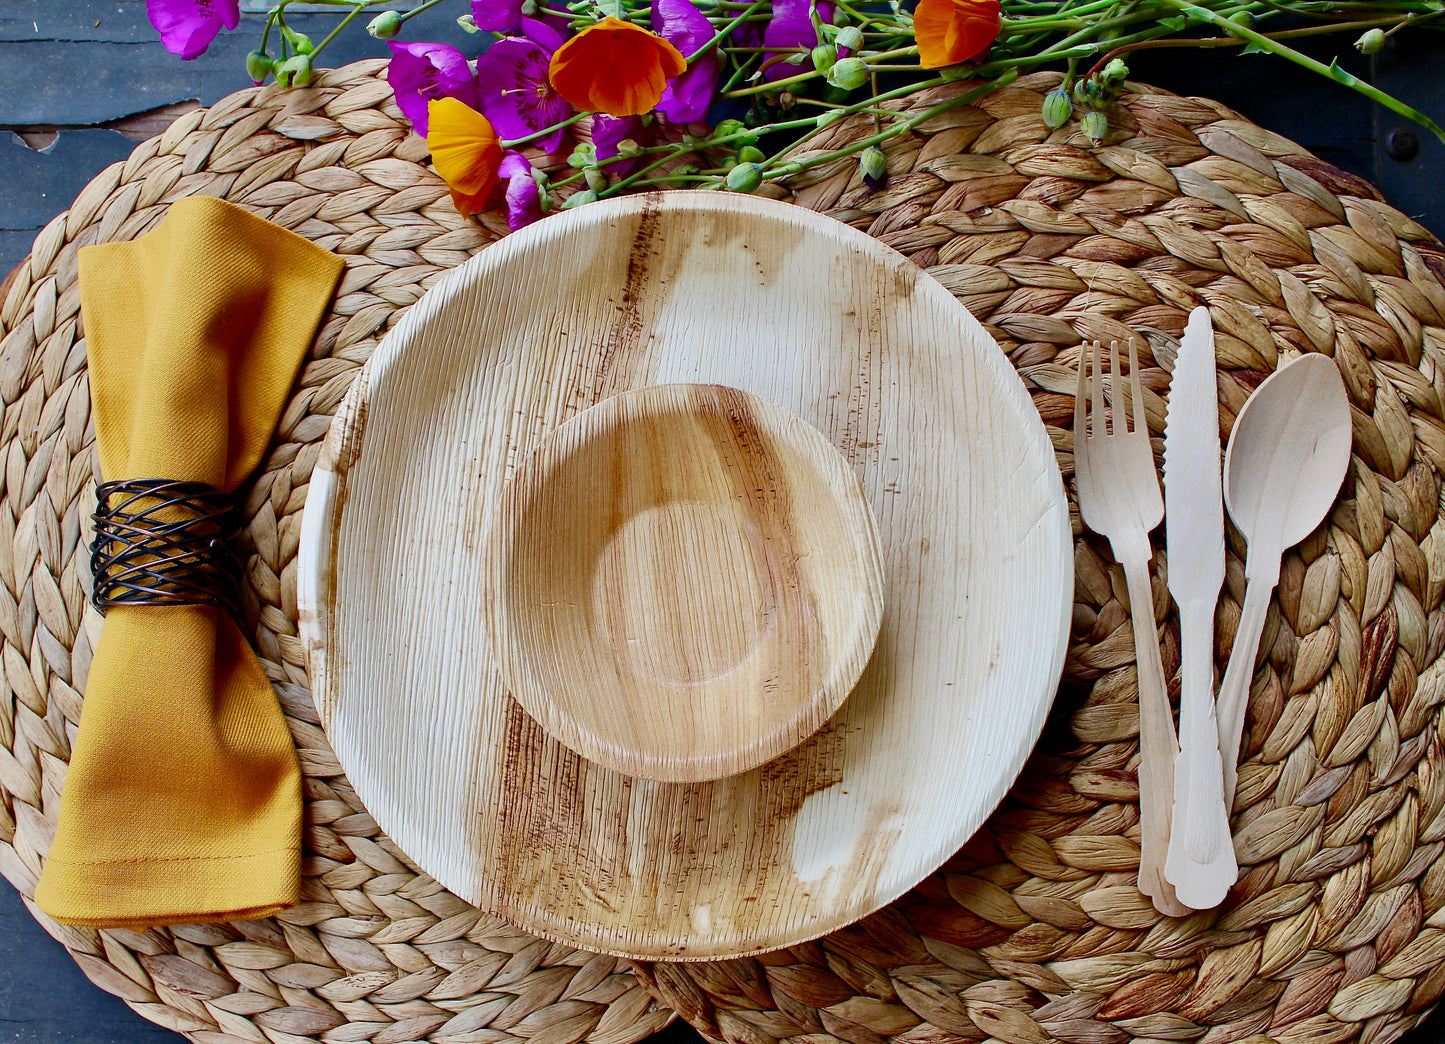 Bamboo type Palm leaf plate 25 Round 10" - 25 Heart 6" - 75 Pic Utensils - 25 Coup - 25 pic napkin